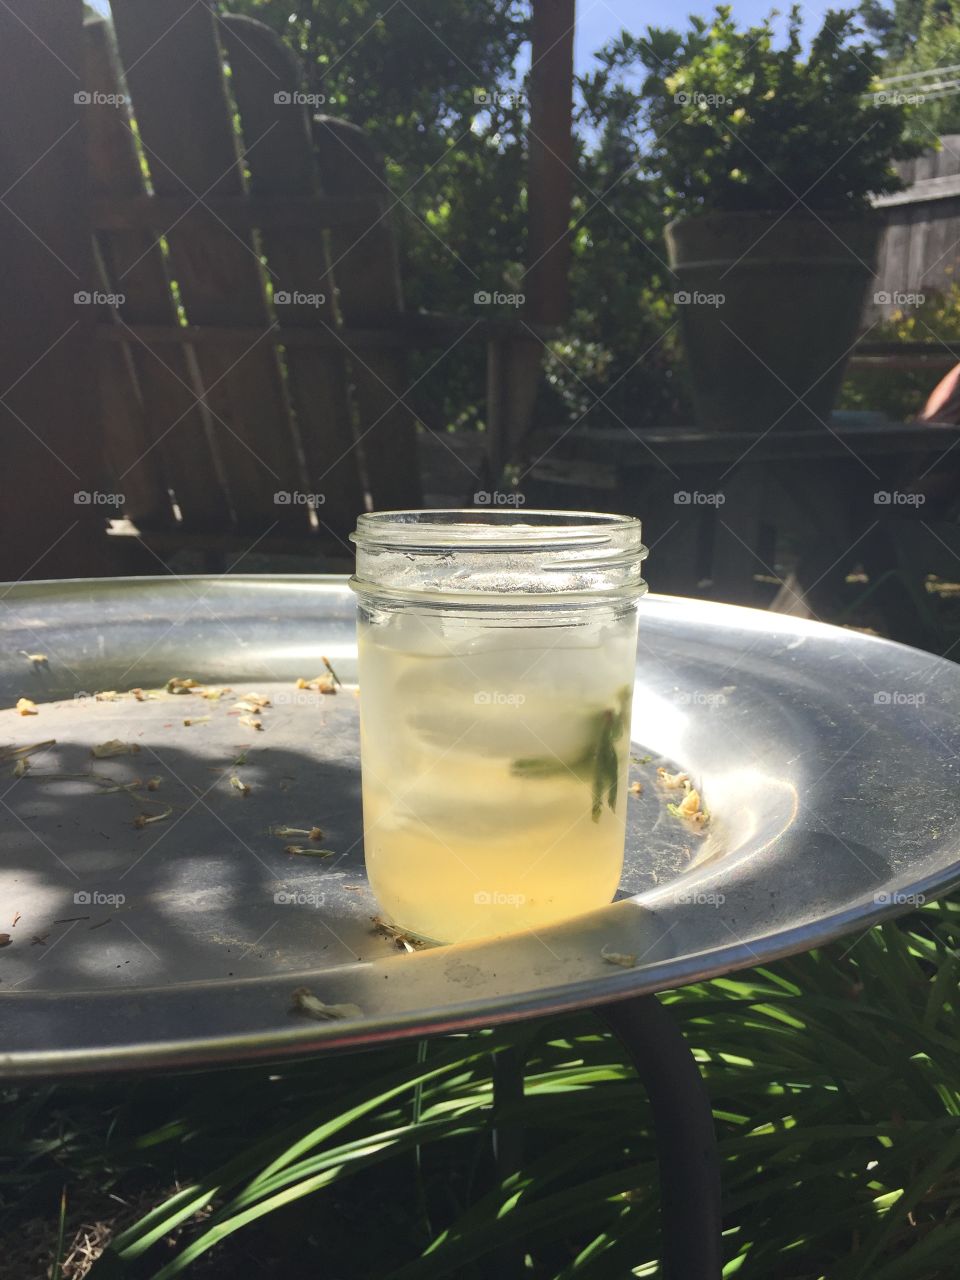 Moscow mule in the garden